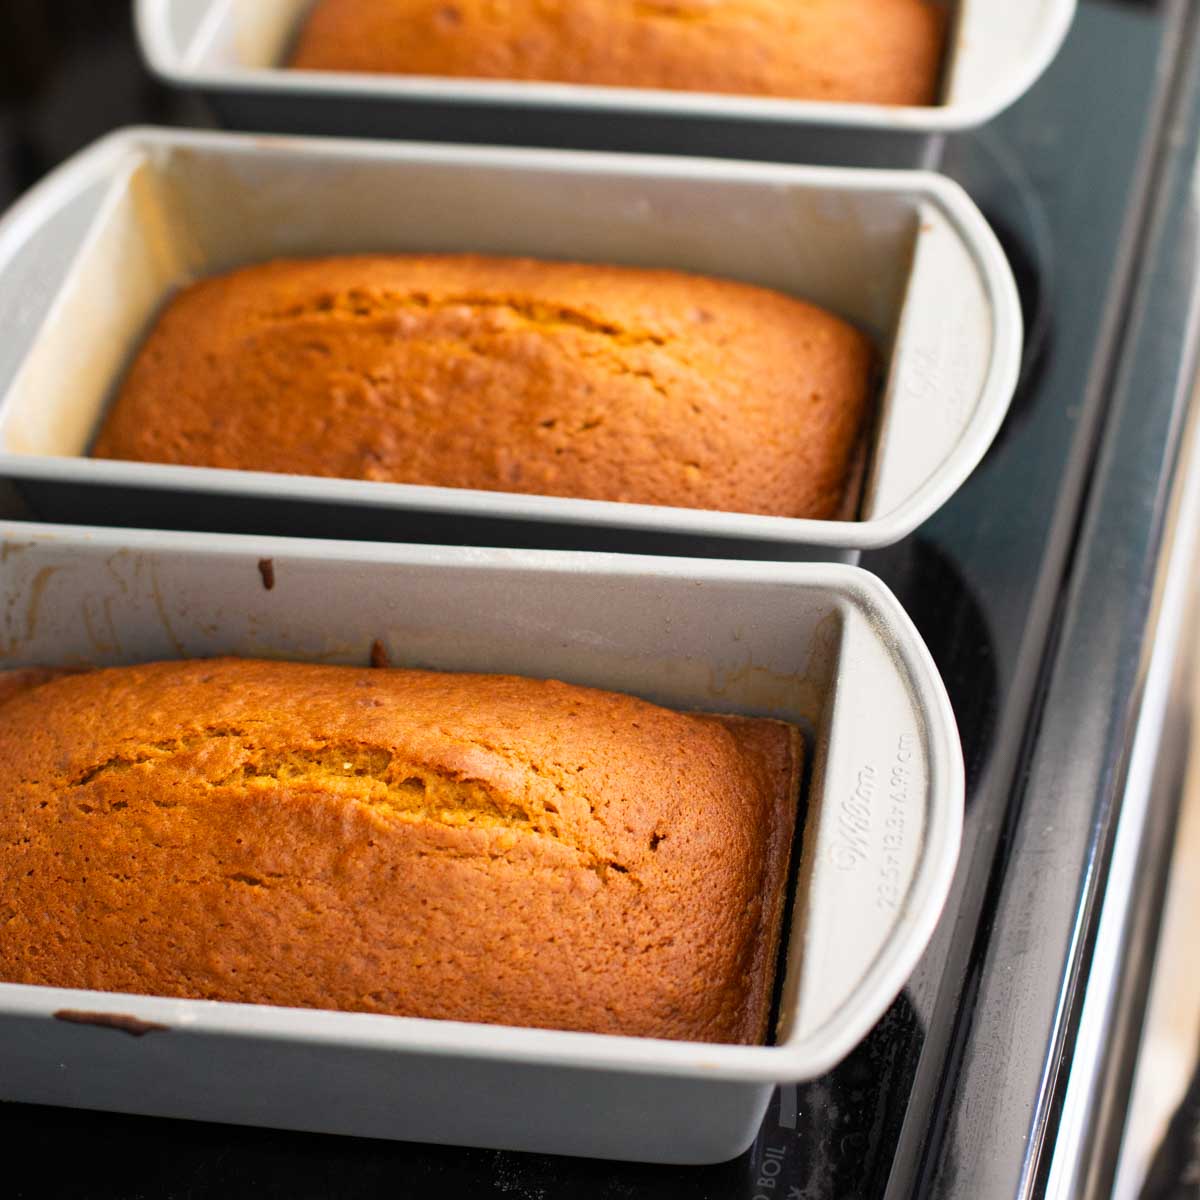 3 pans of homemade pumpkin bread cool on a stove top.